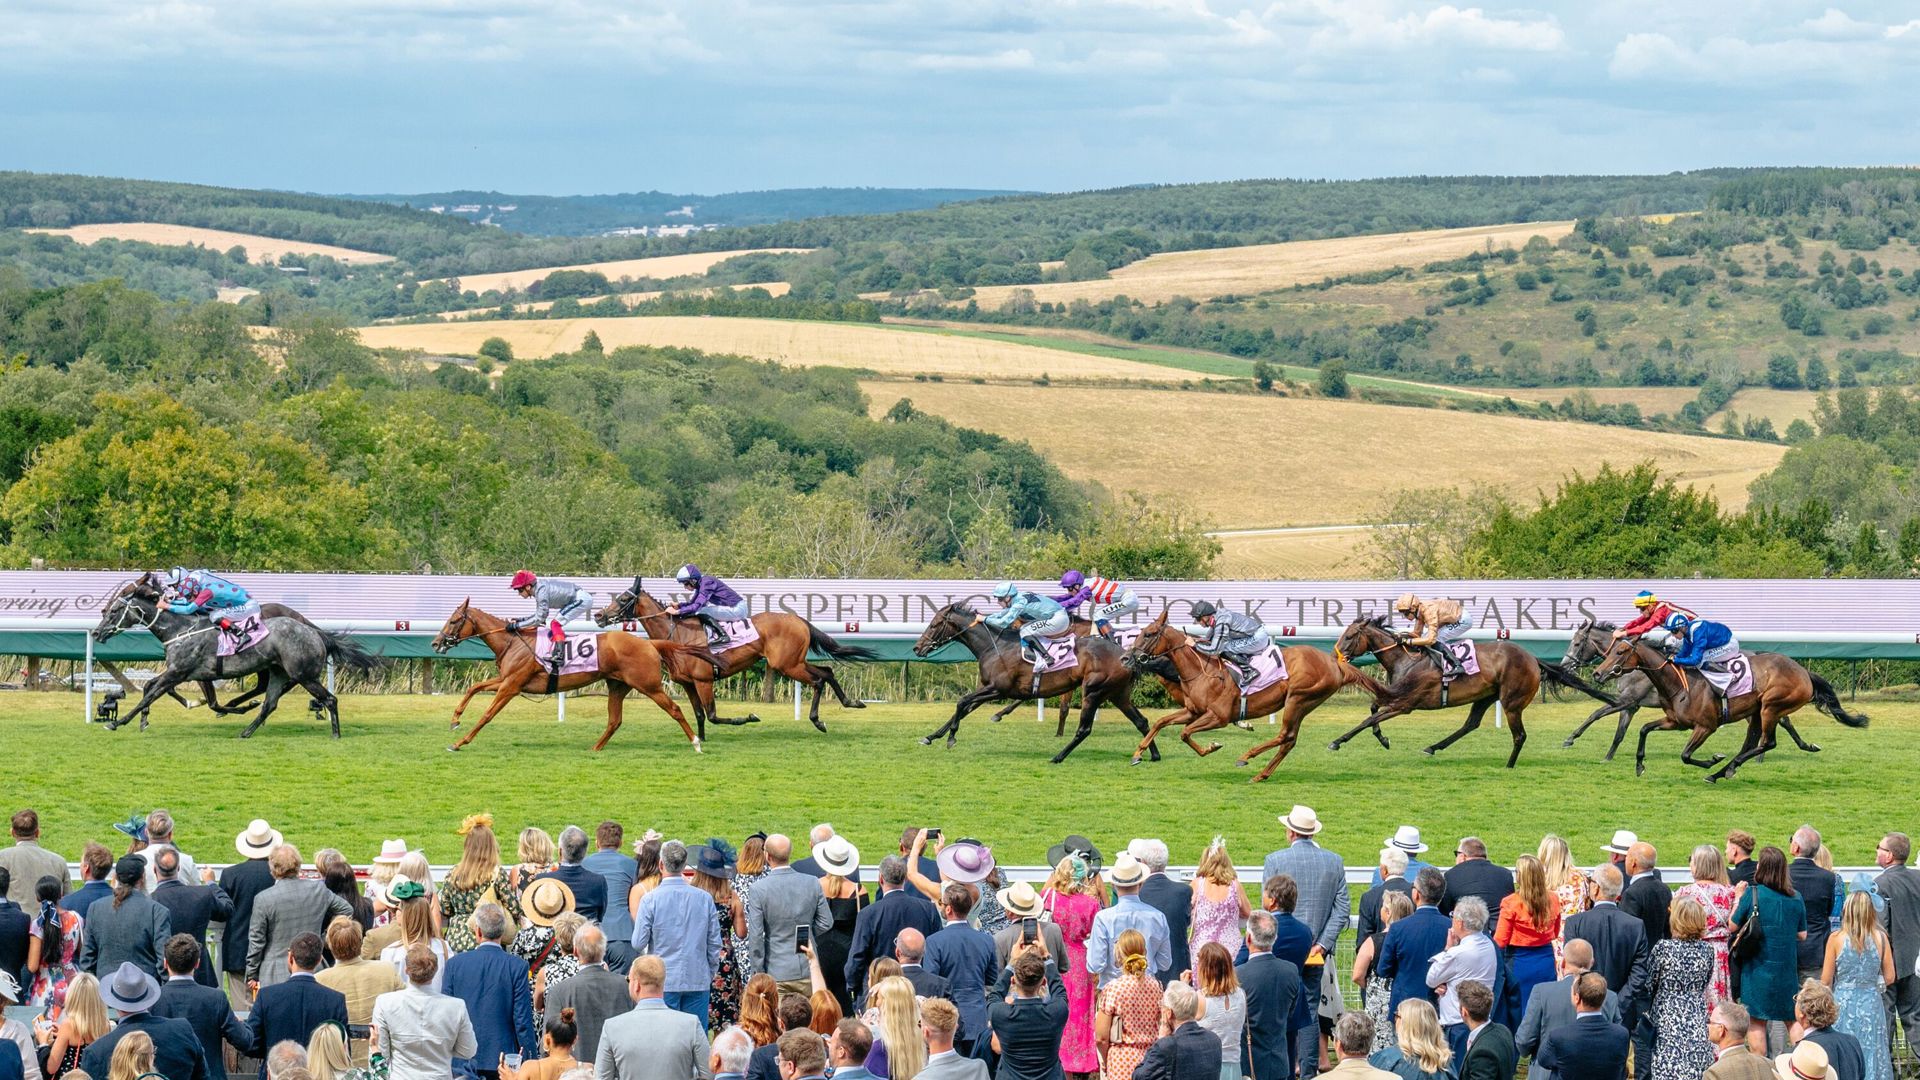 The excitement at Goodwood (Pic - Goodwood)